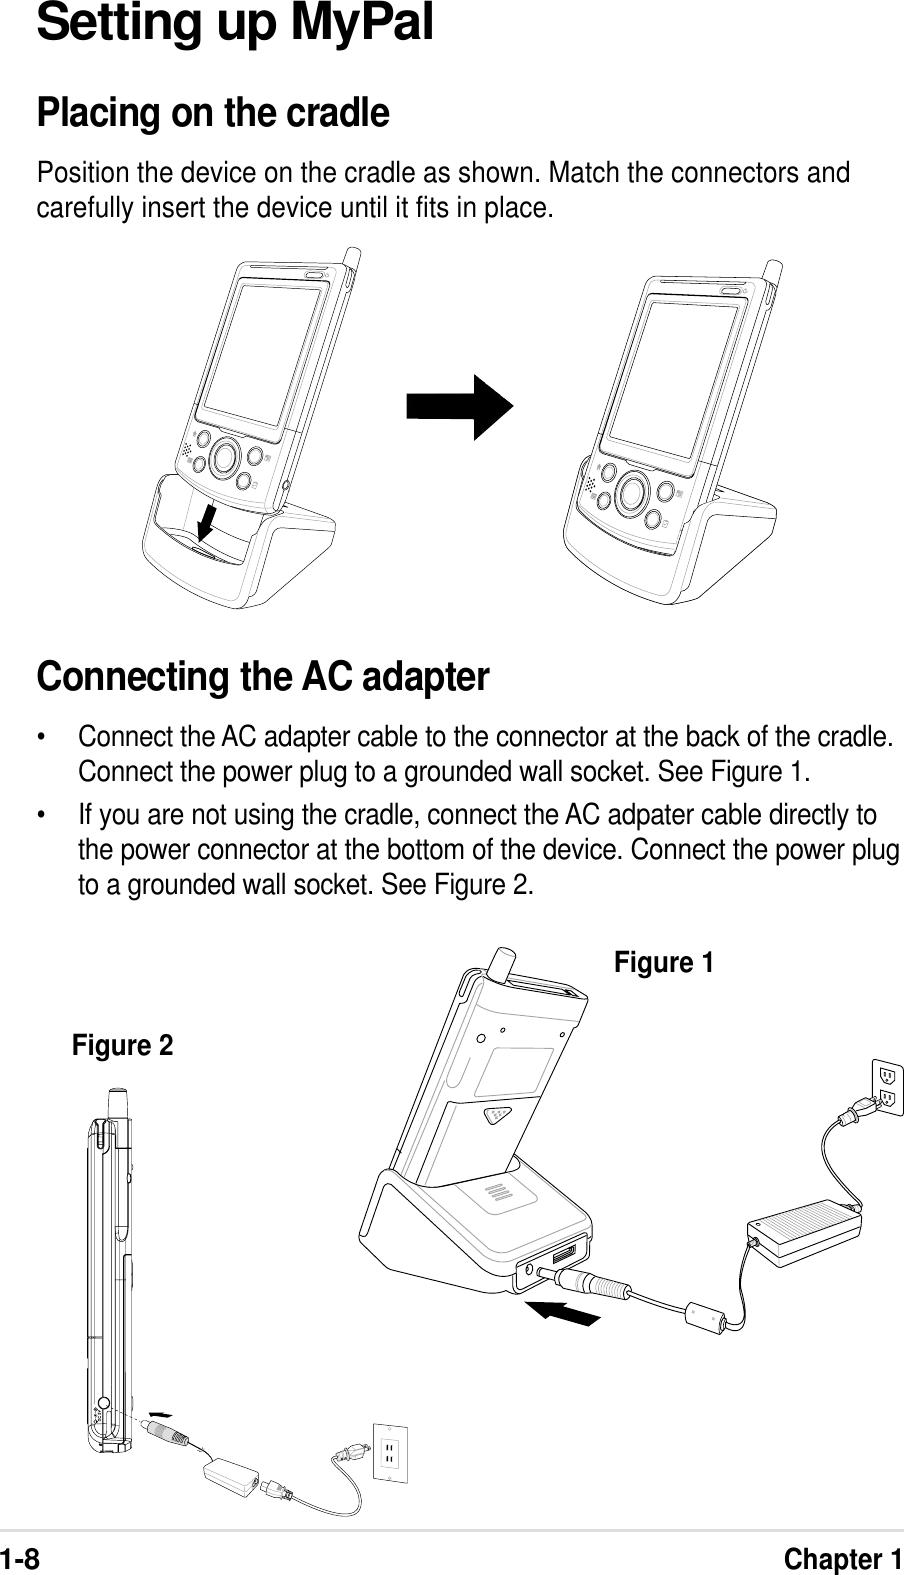 1-8Chapter 1Setting up MyPalPlacing on the cradlePosition the device on the cradle as shown. Match the connectors andcarefully insert the device until it fits in place.Connecting the AC adapter•Connect the AC adapter cable to the connector at the back of the cradle.Connect the power plug to a grounded wall socket. See Figure 1.•If you are not using the cradle, connect the AC adpater cable directly tothe power connector at the bottom of the device. Connect the power plugto a grounded wall socket. See Figure 2.Figure 1Figure 2